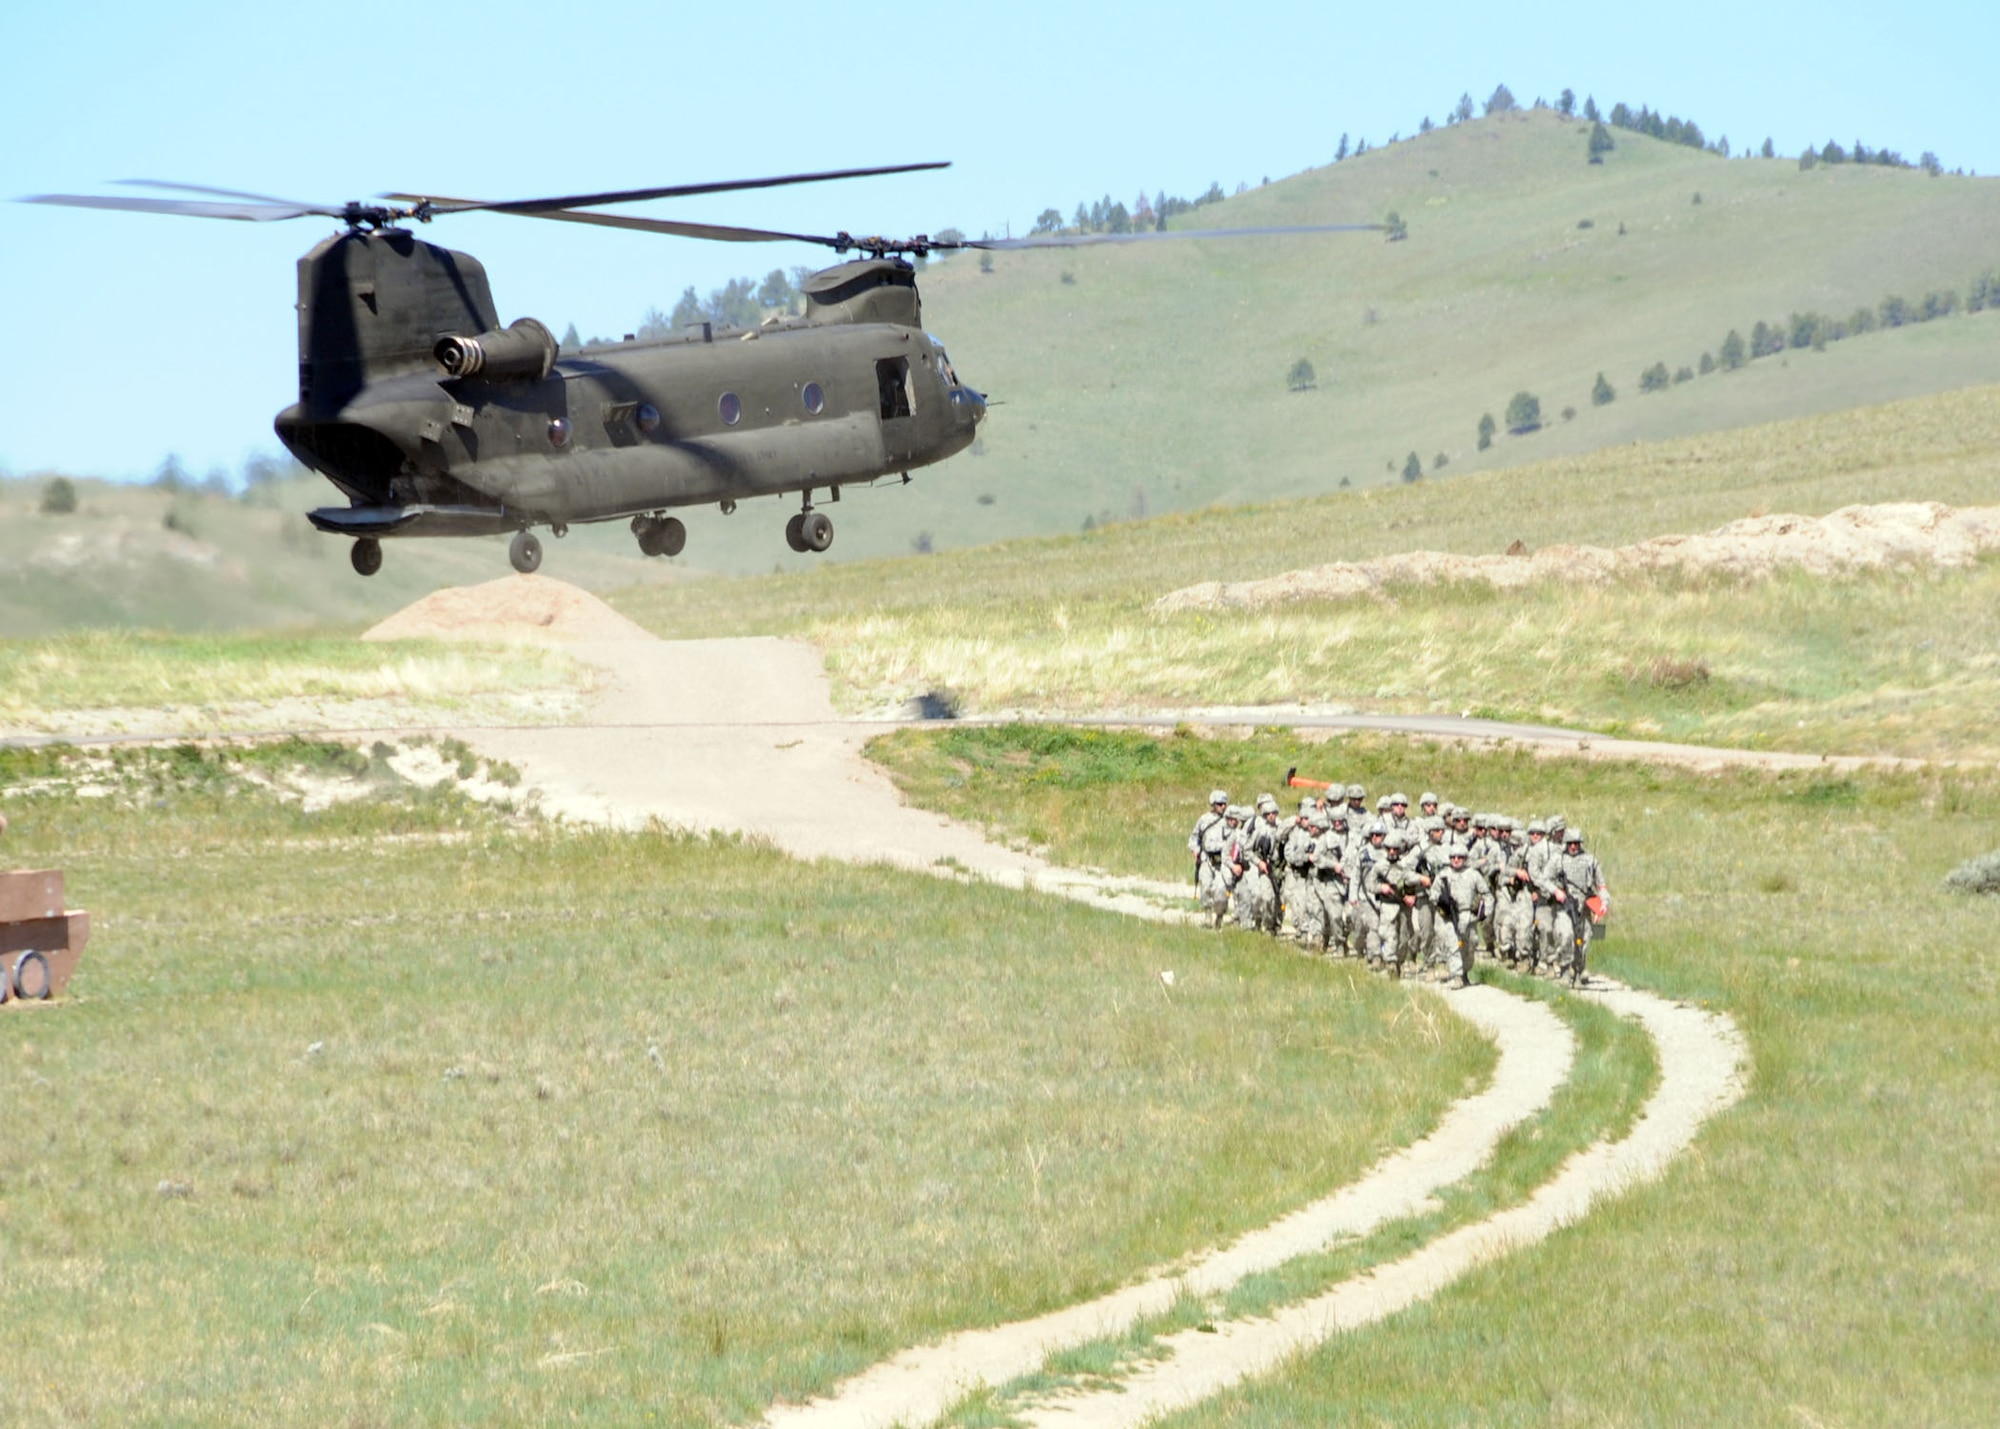 Members of the 219th RED HORSE Squadron form up after being transported from Malmstrom Air Force Base in a C-47 Chinook helicopter during a field training exercise at Fort Harrison, Mont. June 10, 2013.  The squadron participated in contingency training during their unit training assembly. (U.S. Air Force photo/2nd Lt Robin Jirovsky)